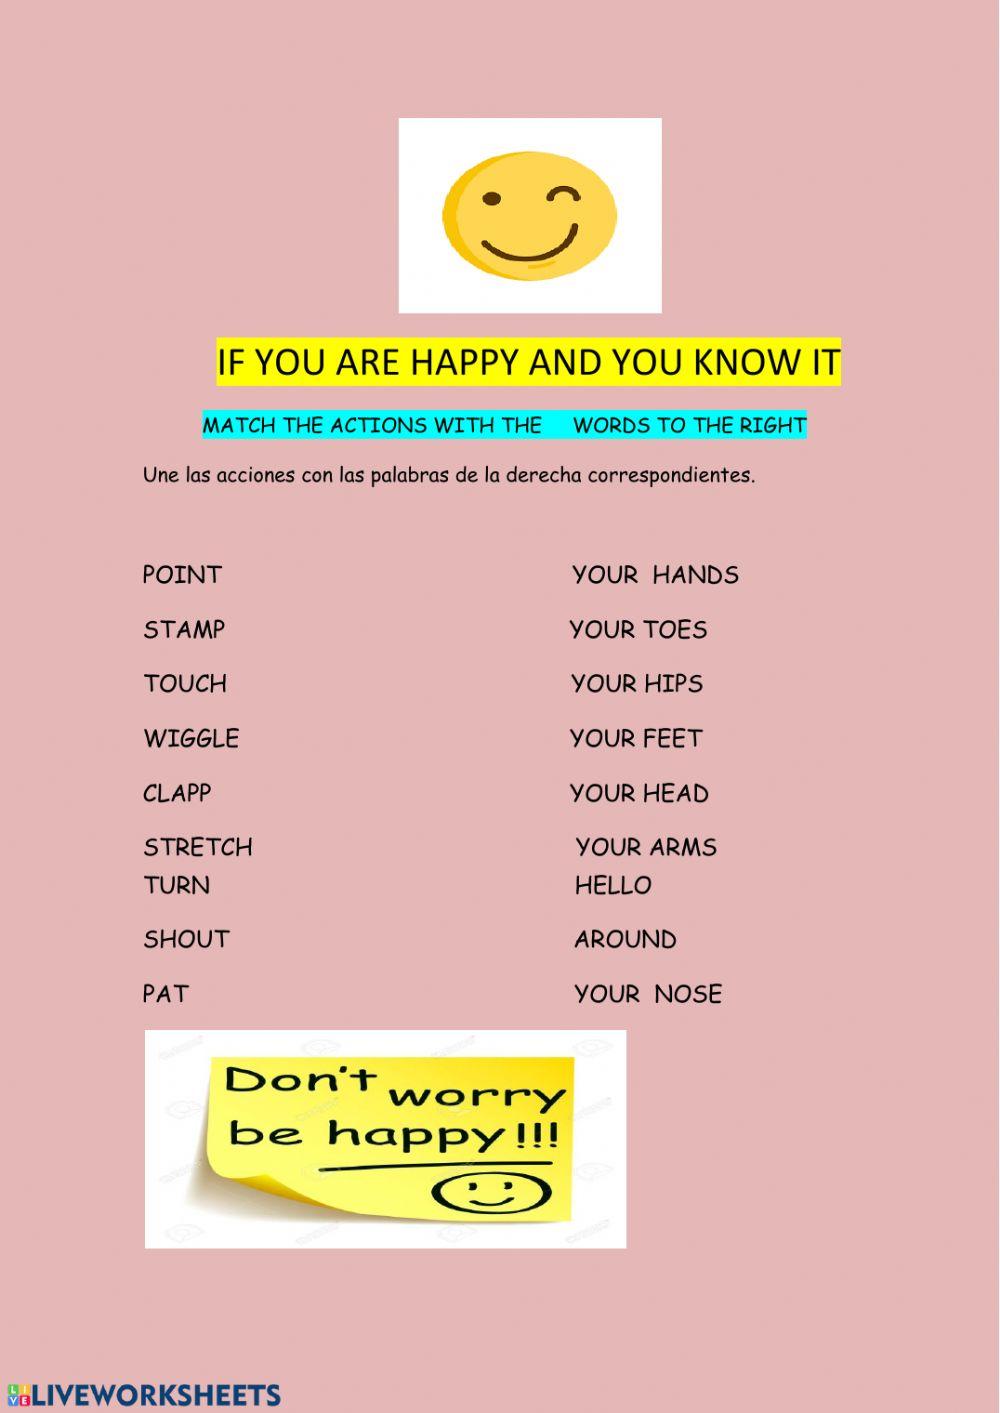 If you are happy